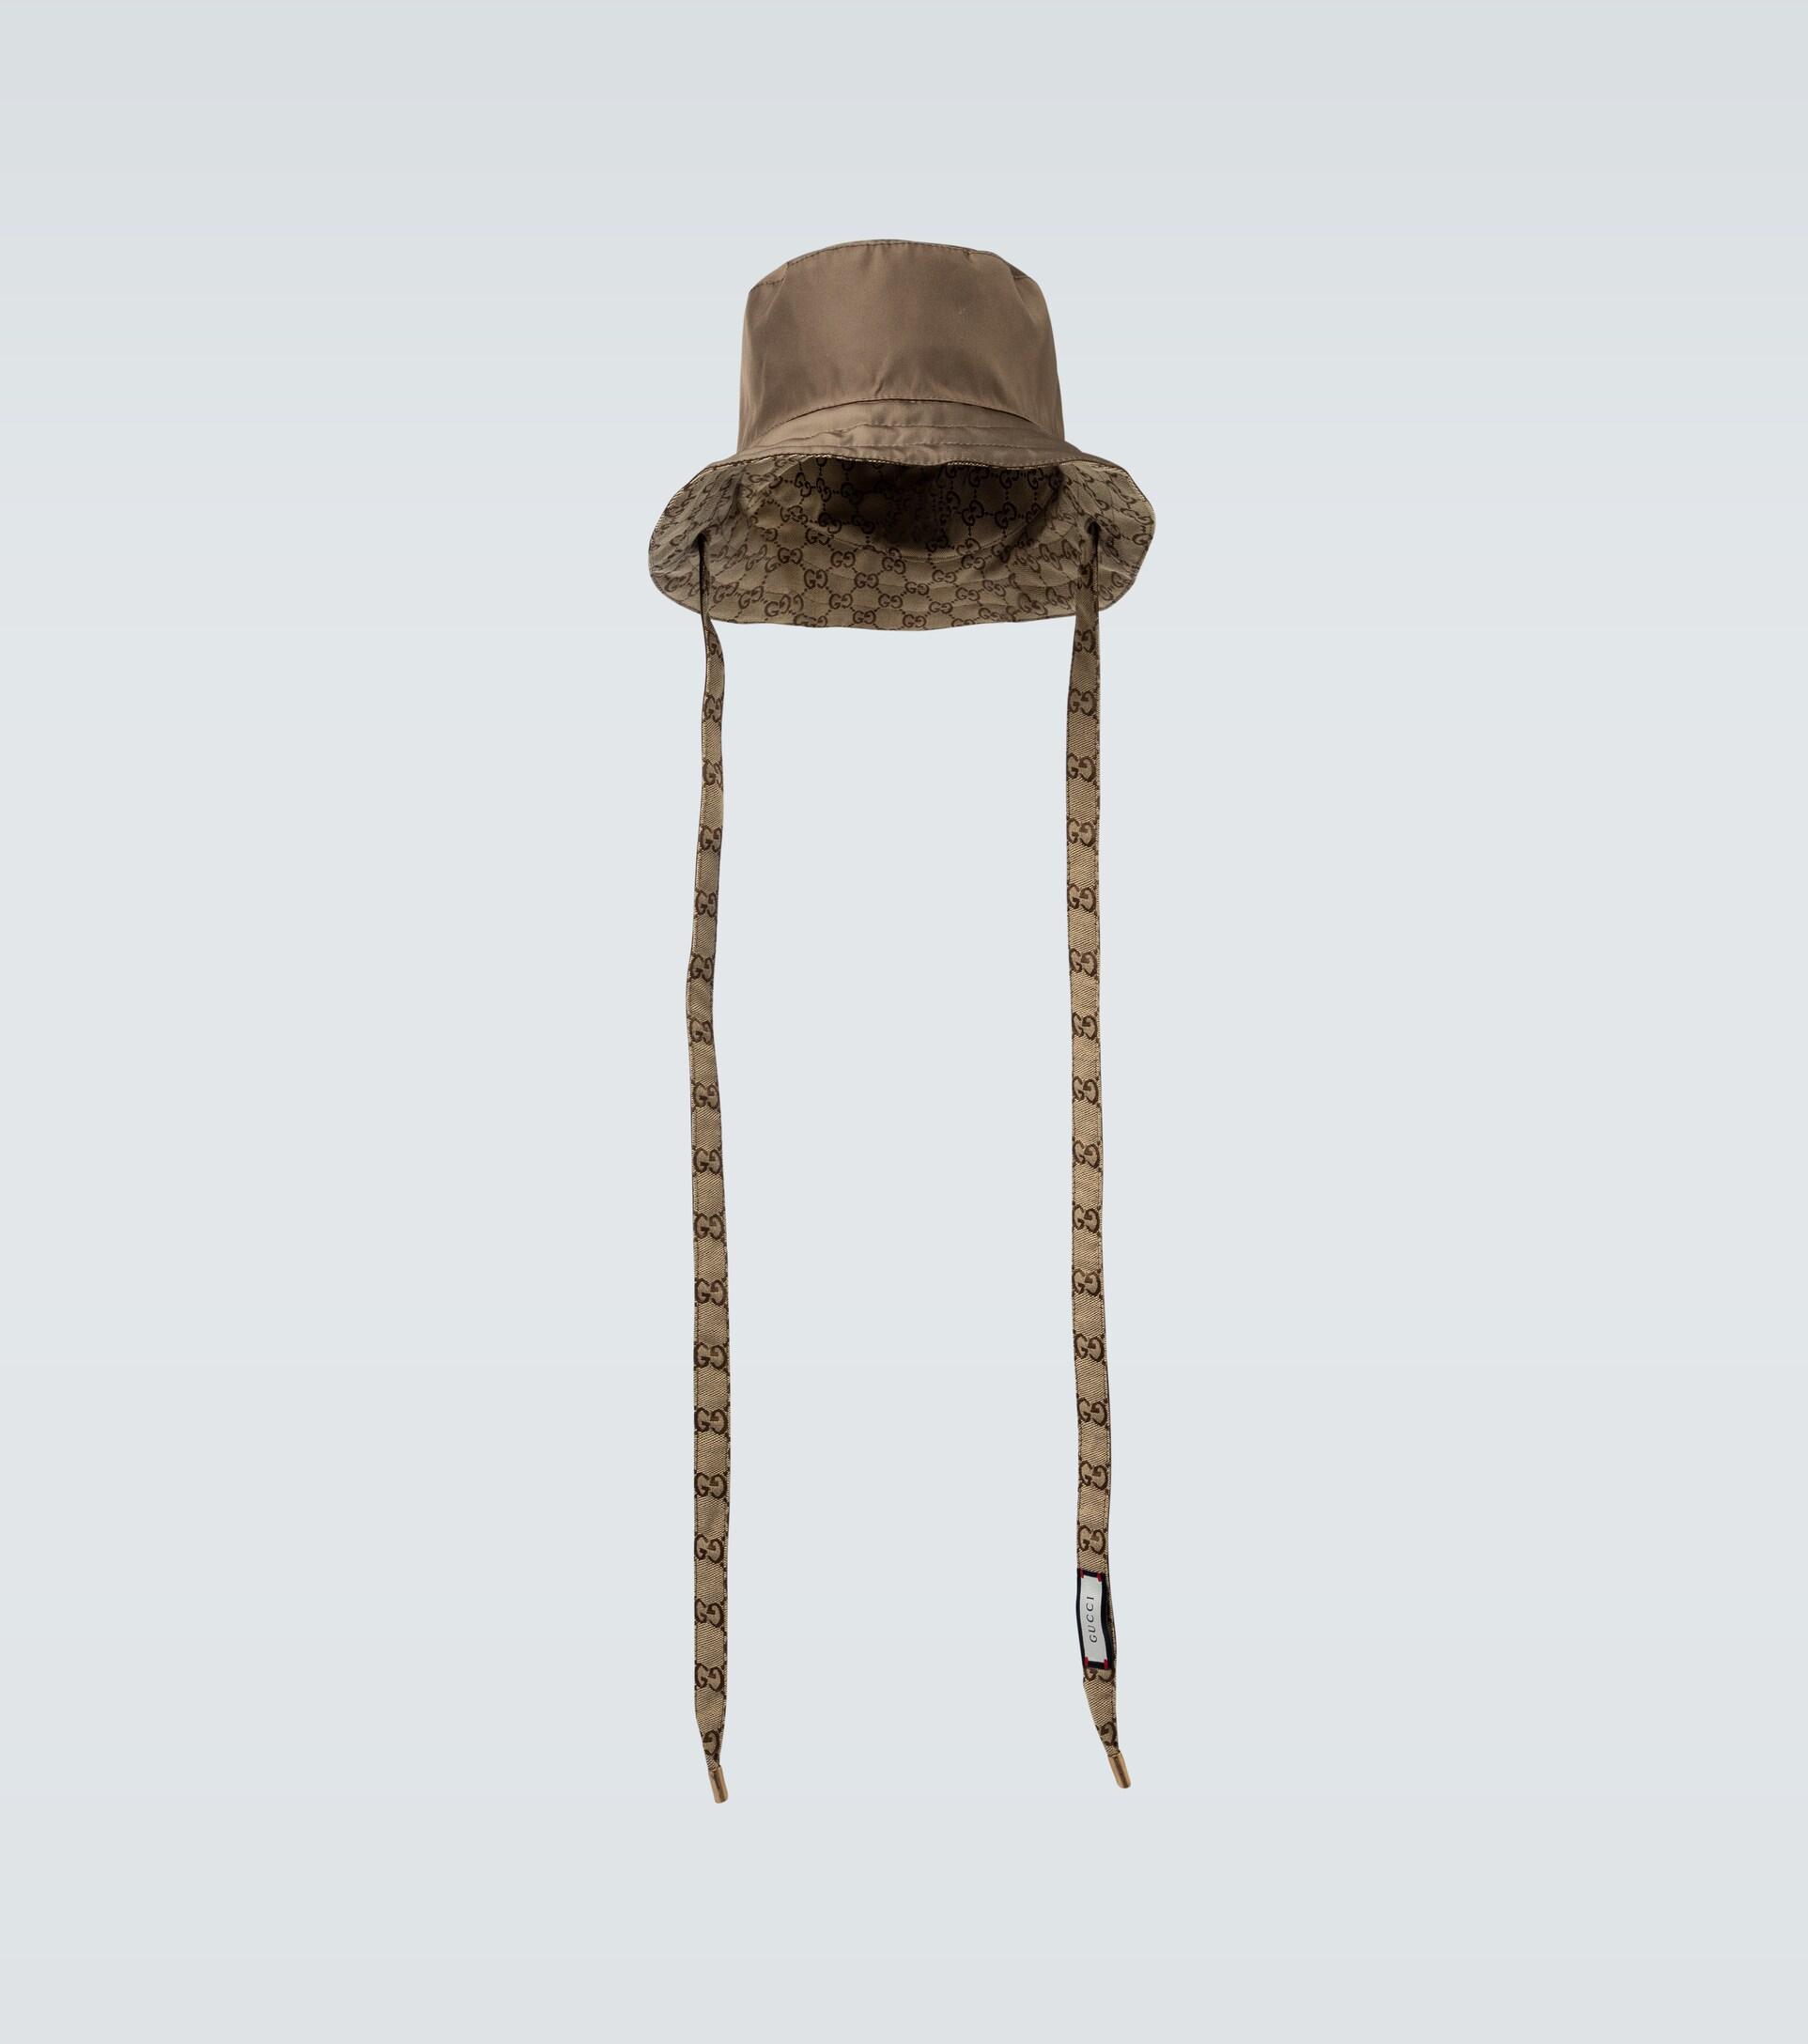 Gucci Reversible gg Bucket Hat in Brown for Men | Lyst